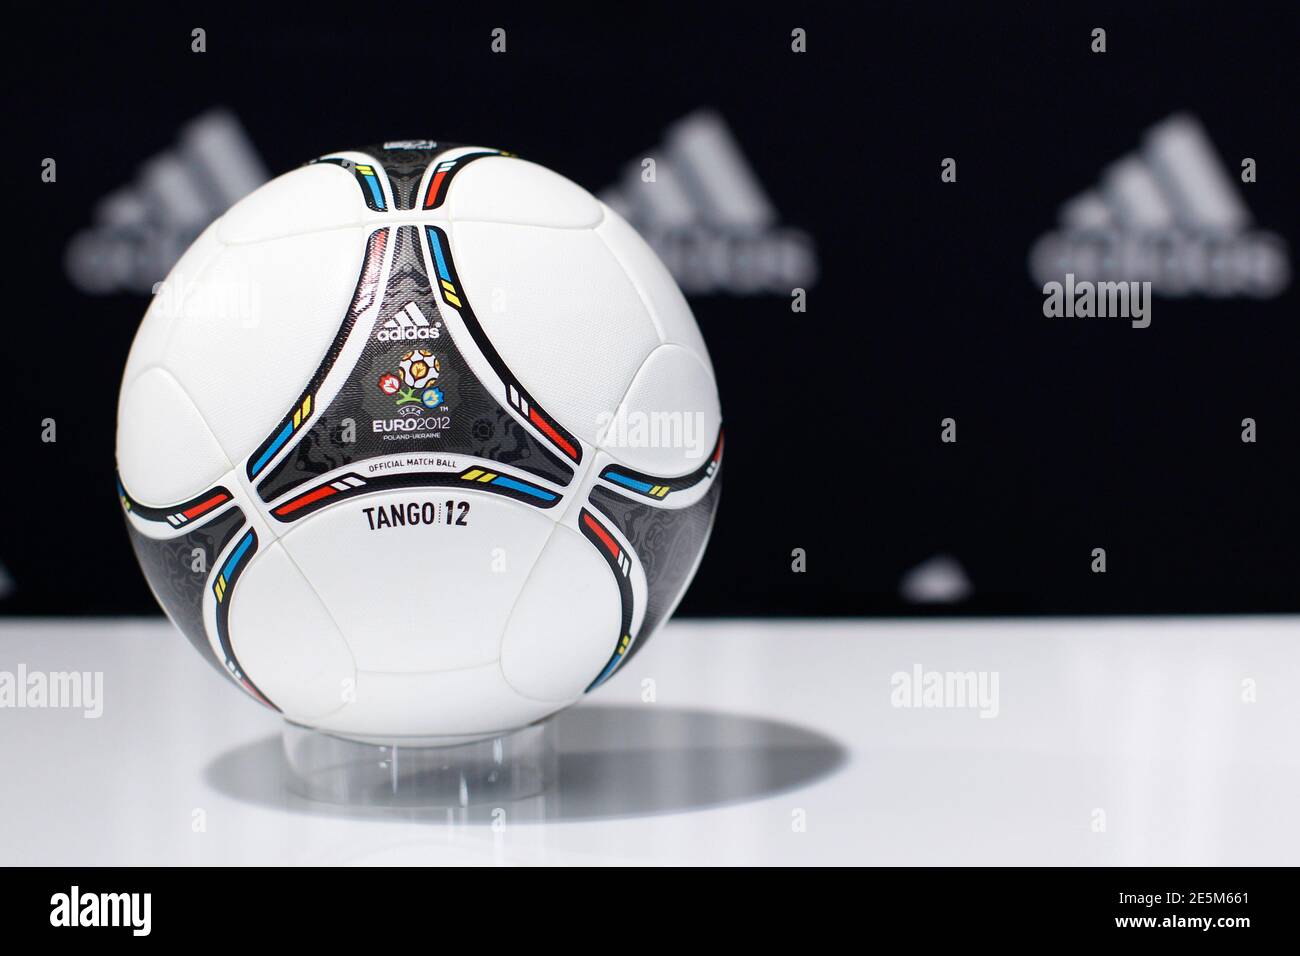 a la deriva Censo nacional Petición A "Tango 12" soccer ball for the upcoming Euro 2012 soccer tournament is  displayed during a news conference at the sporting goods maker Adidas shop  in Paris May 22, 2012. REUTERS/Gonzalo Fuentes (